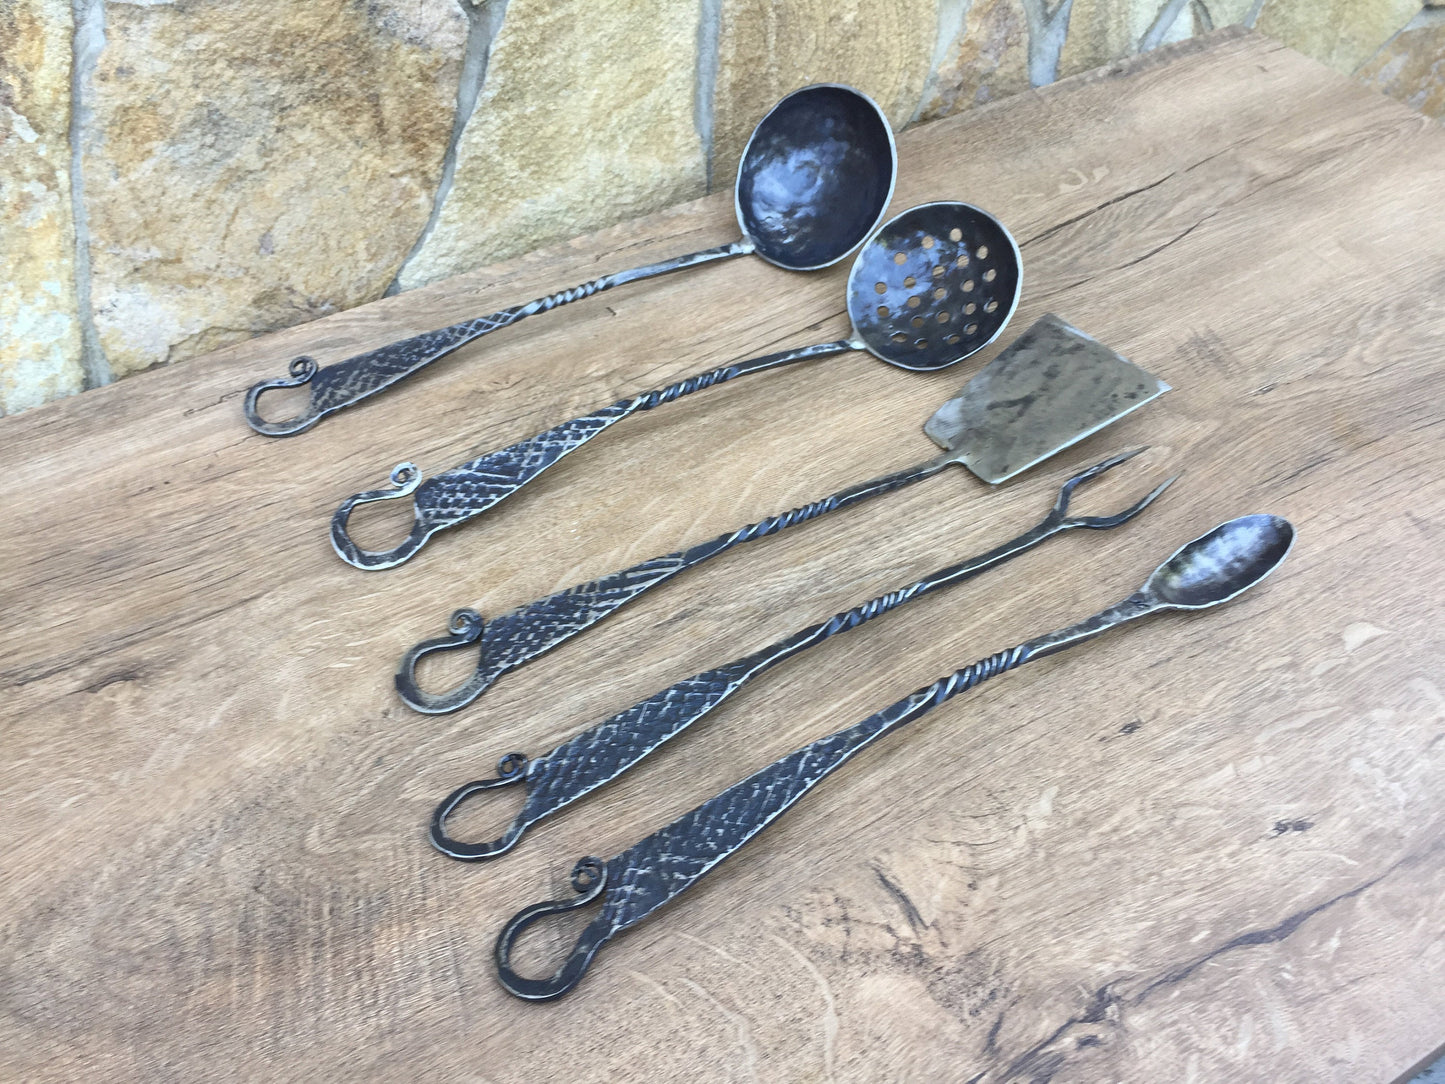 Medieval cutlery, ladle, ladle water dipper, spatula, fork, spoon, middle ages cutlery, camp equipment, serving utensils, kitchen utensils